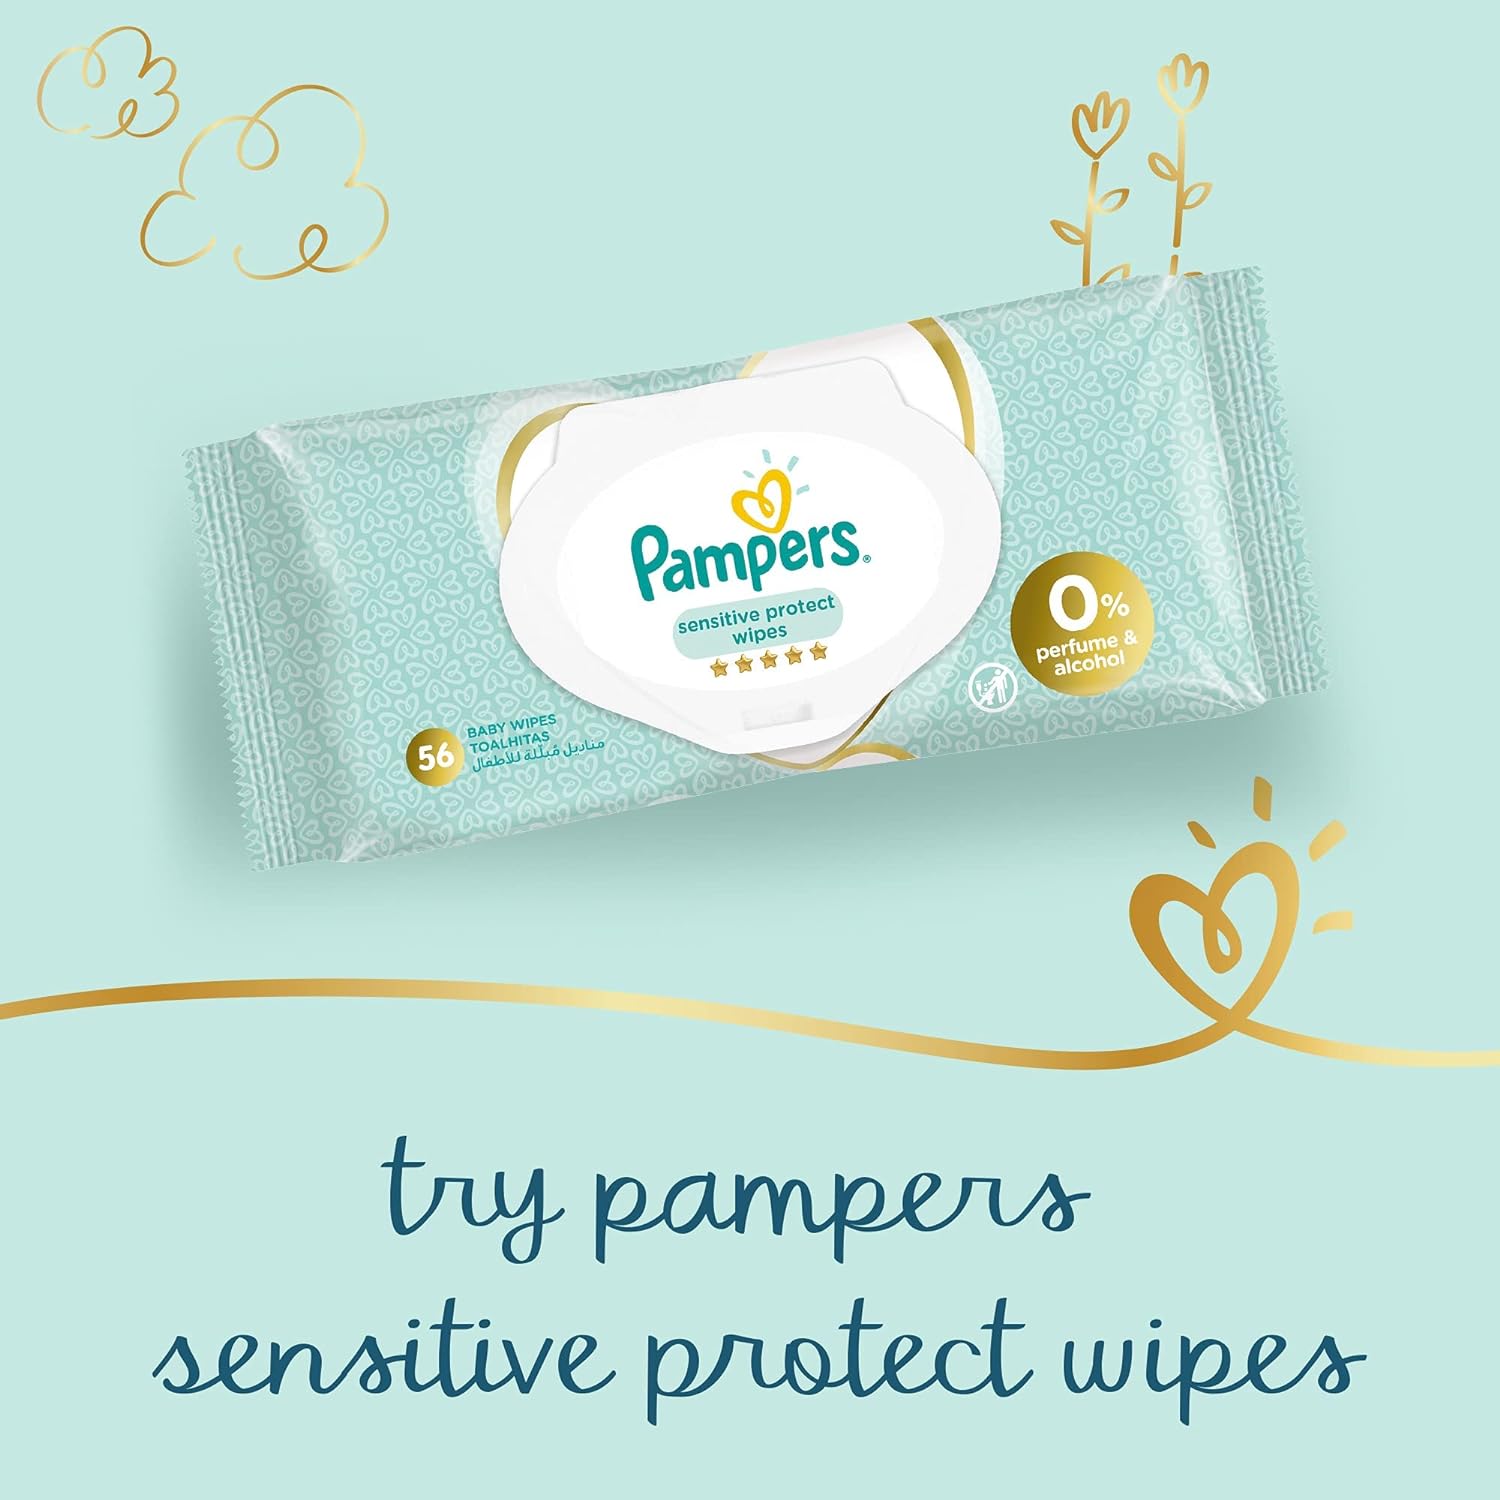 Pampers Premium Care Newborn Taped Diapers, Size 2, 3-8kg, Unique Softest Absorption for Ultimate Skin Protection, 136 Count - Laadlee